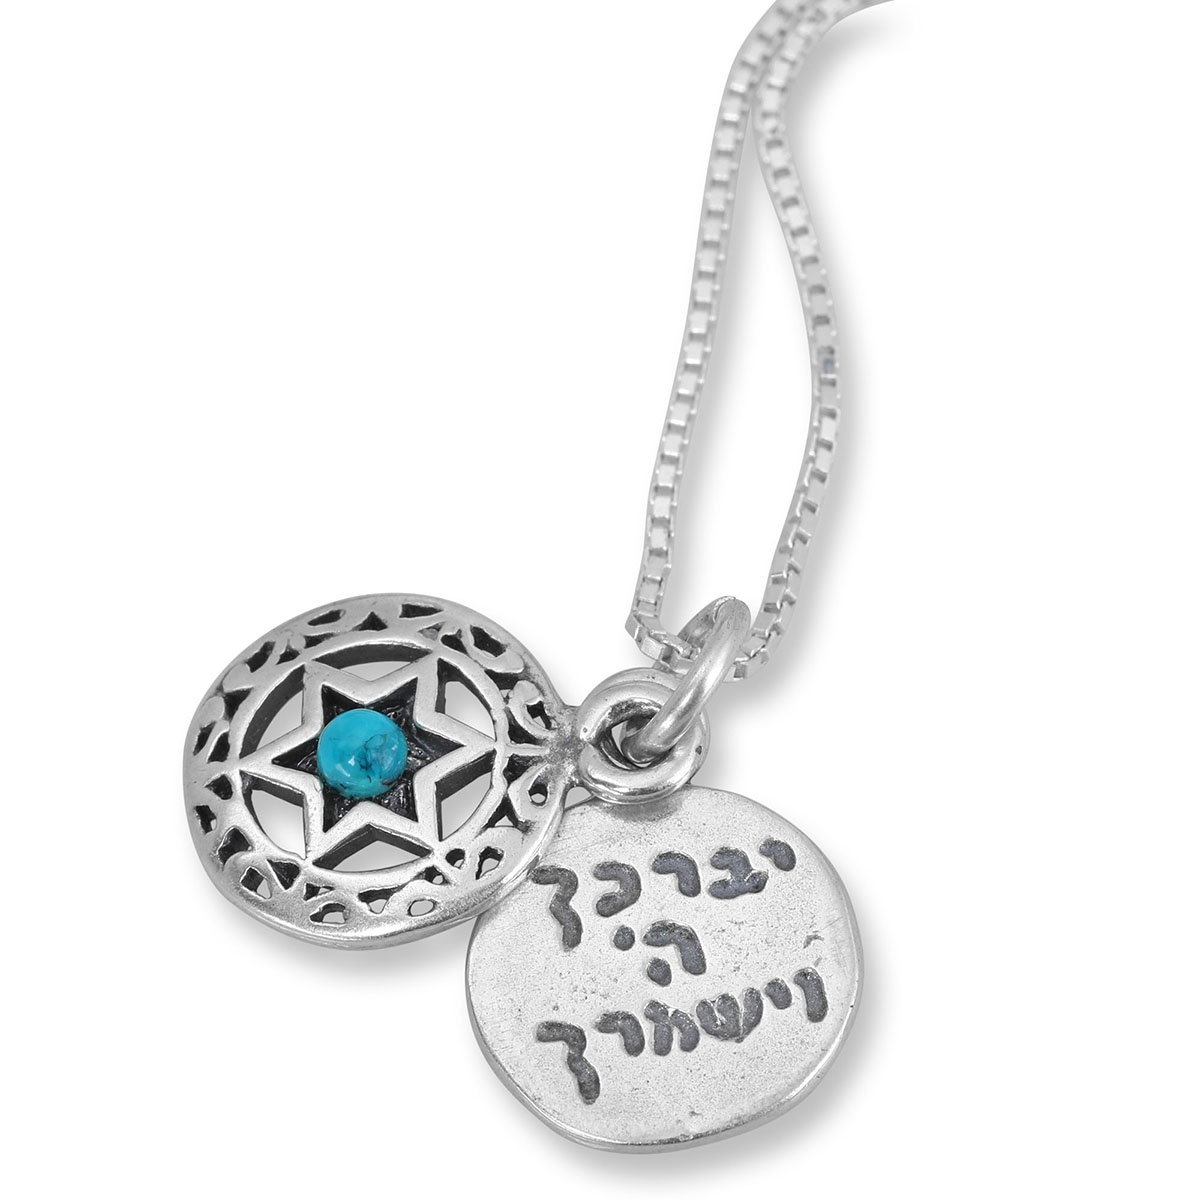 Shema Israel: Little Layered Double Disk Star of David Pendant with Turquoise - 1